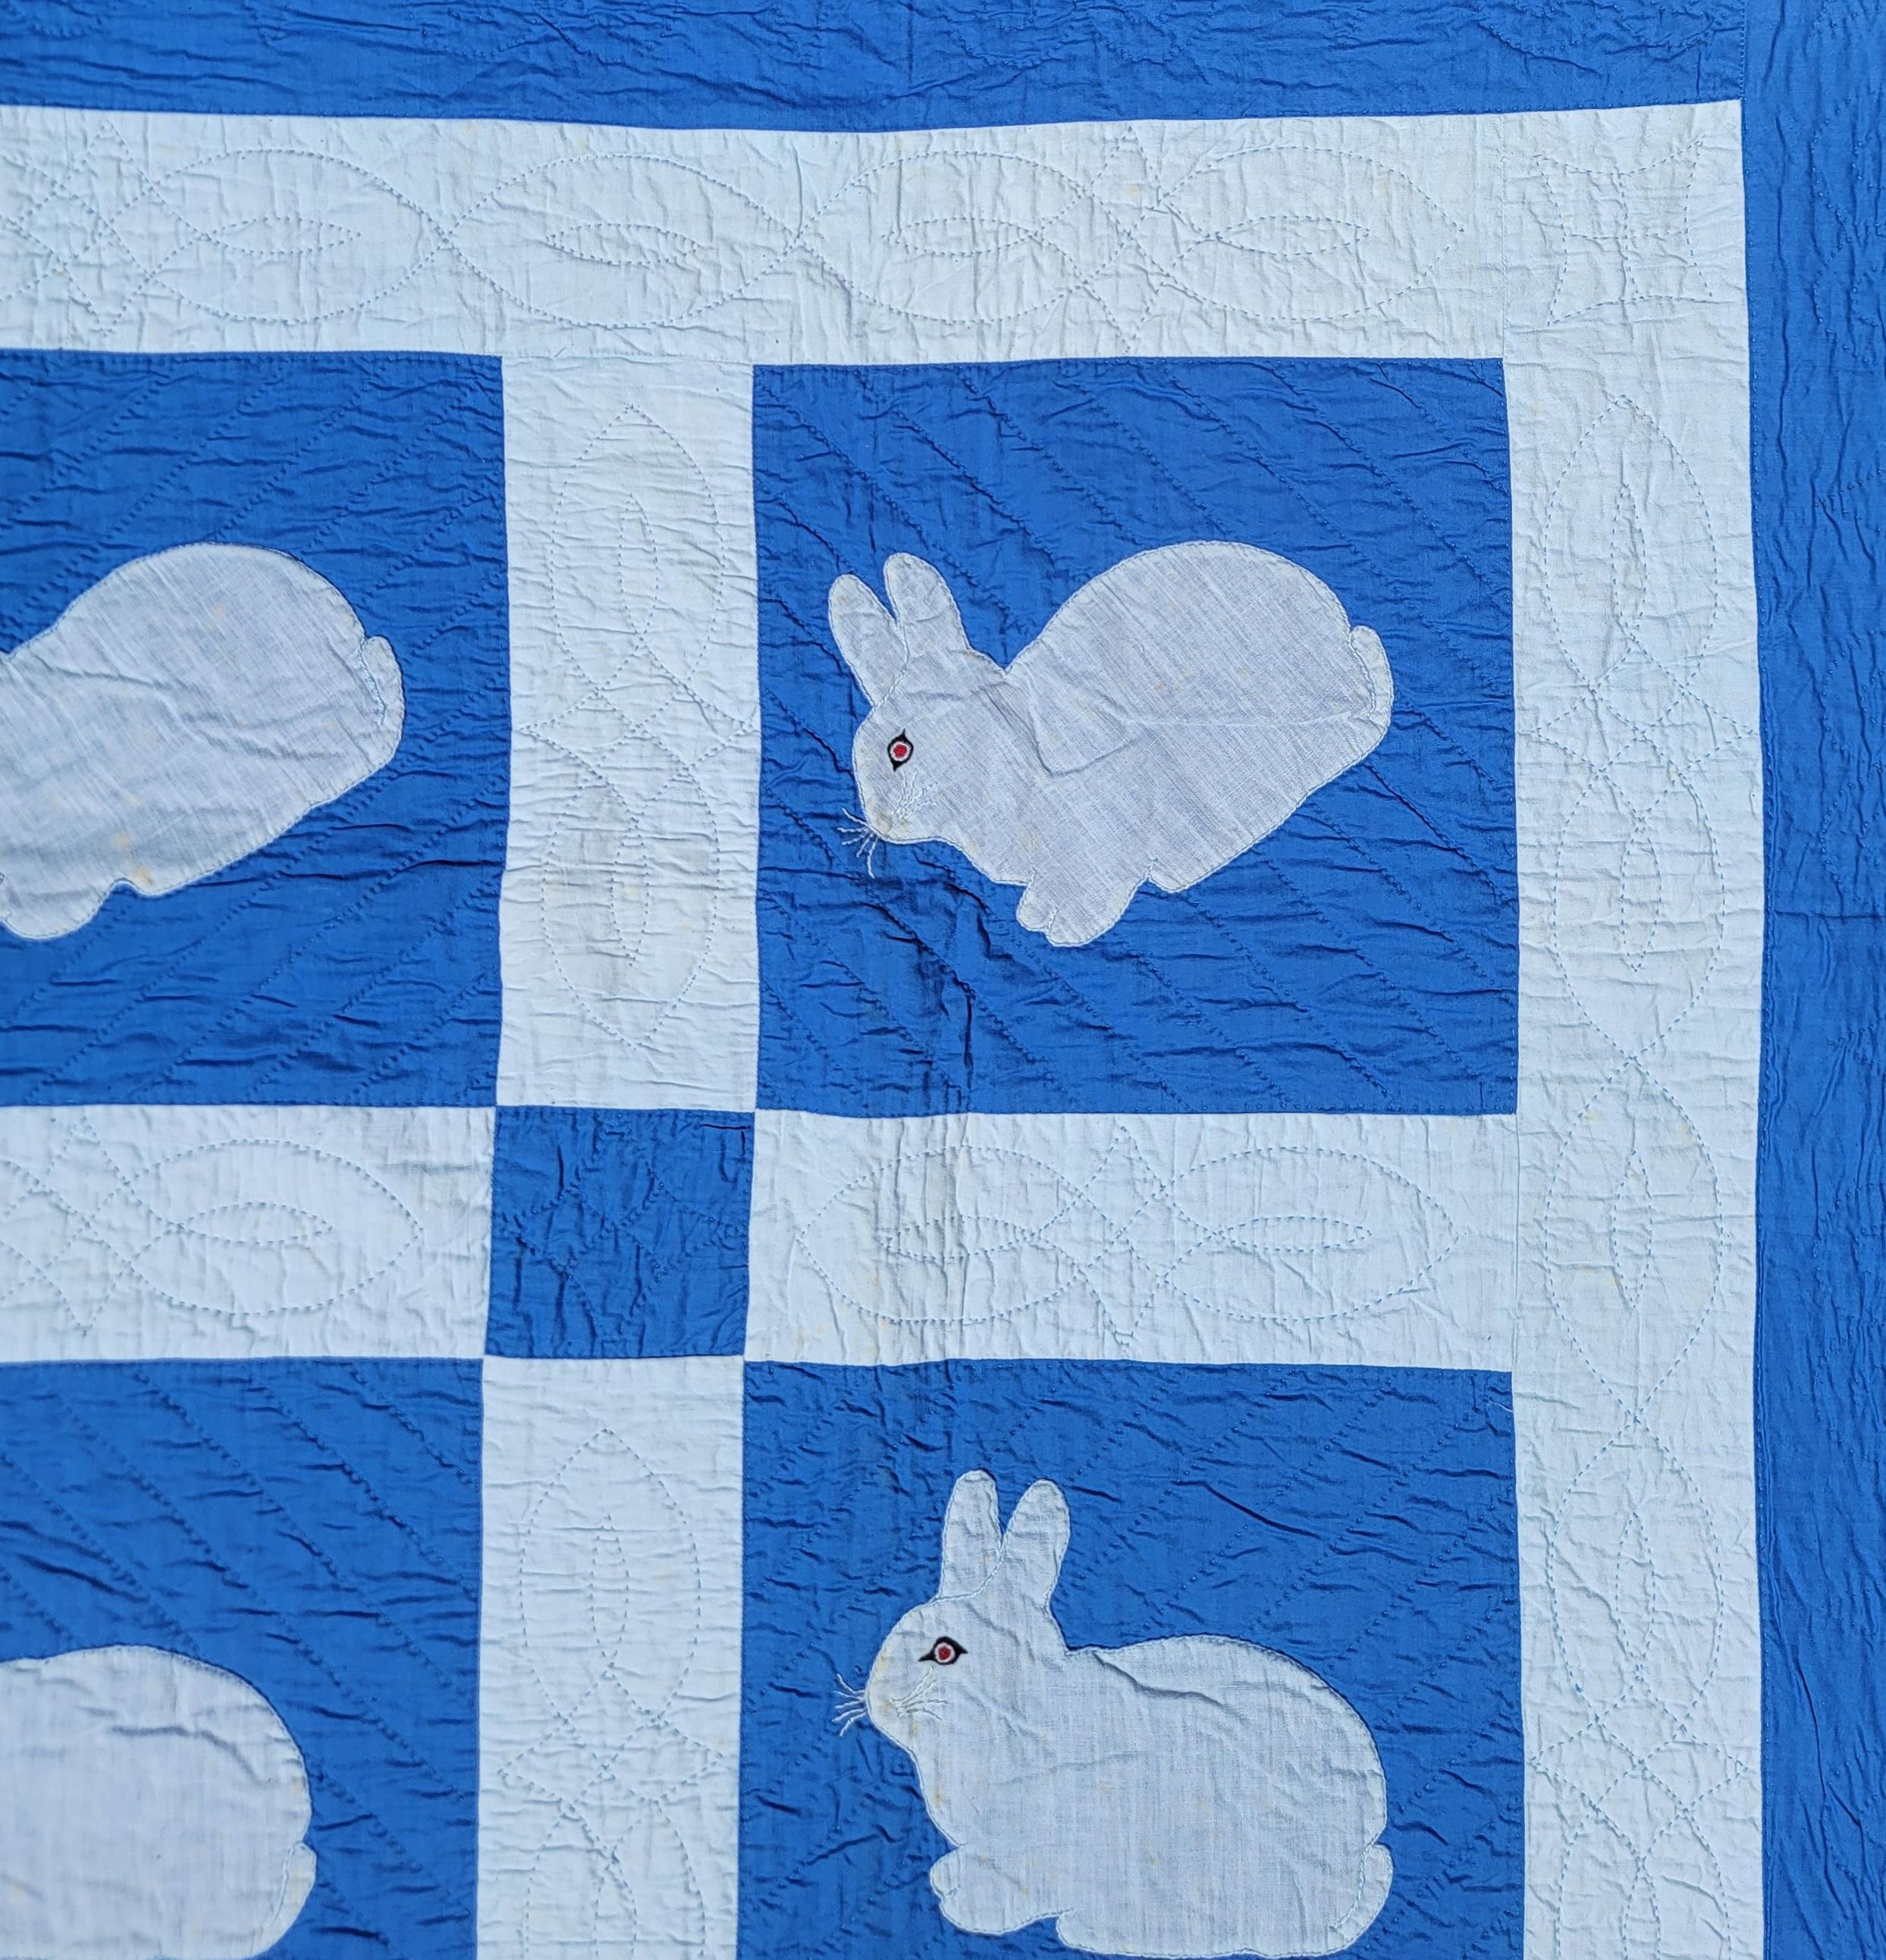 This folky rabbit applique quilt is in good condition and has hand sewn eyes. The condition is very good and nice quilting.